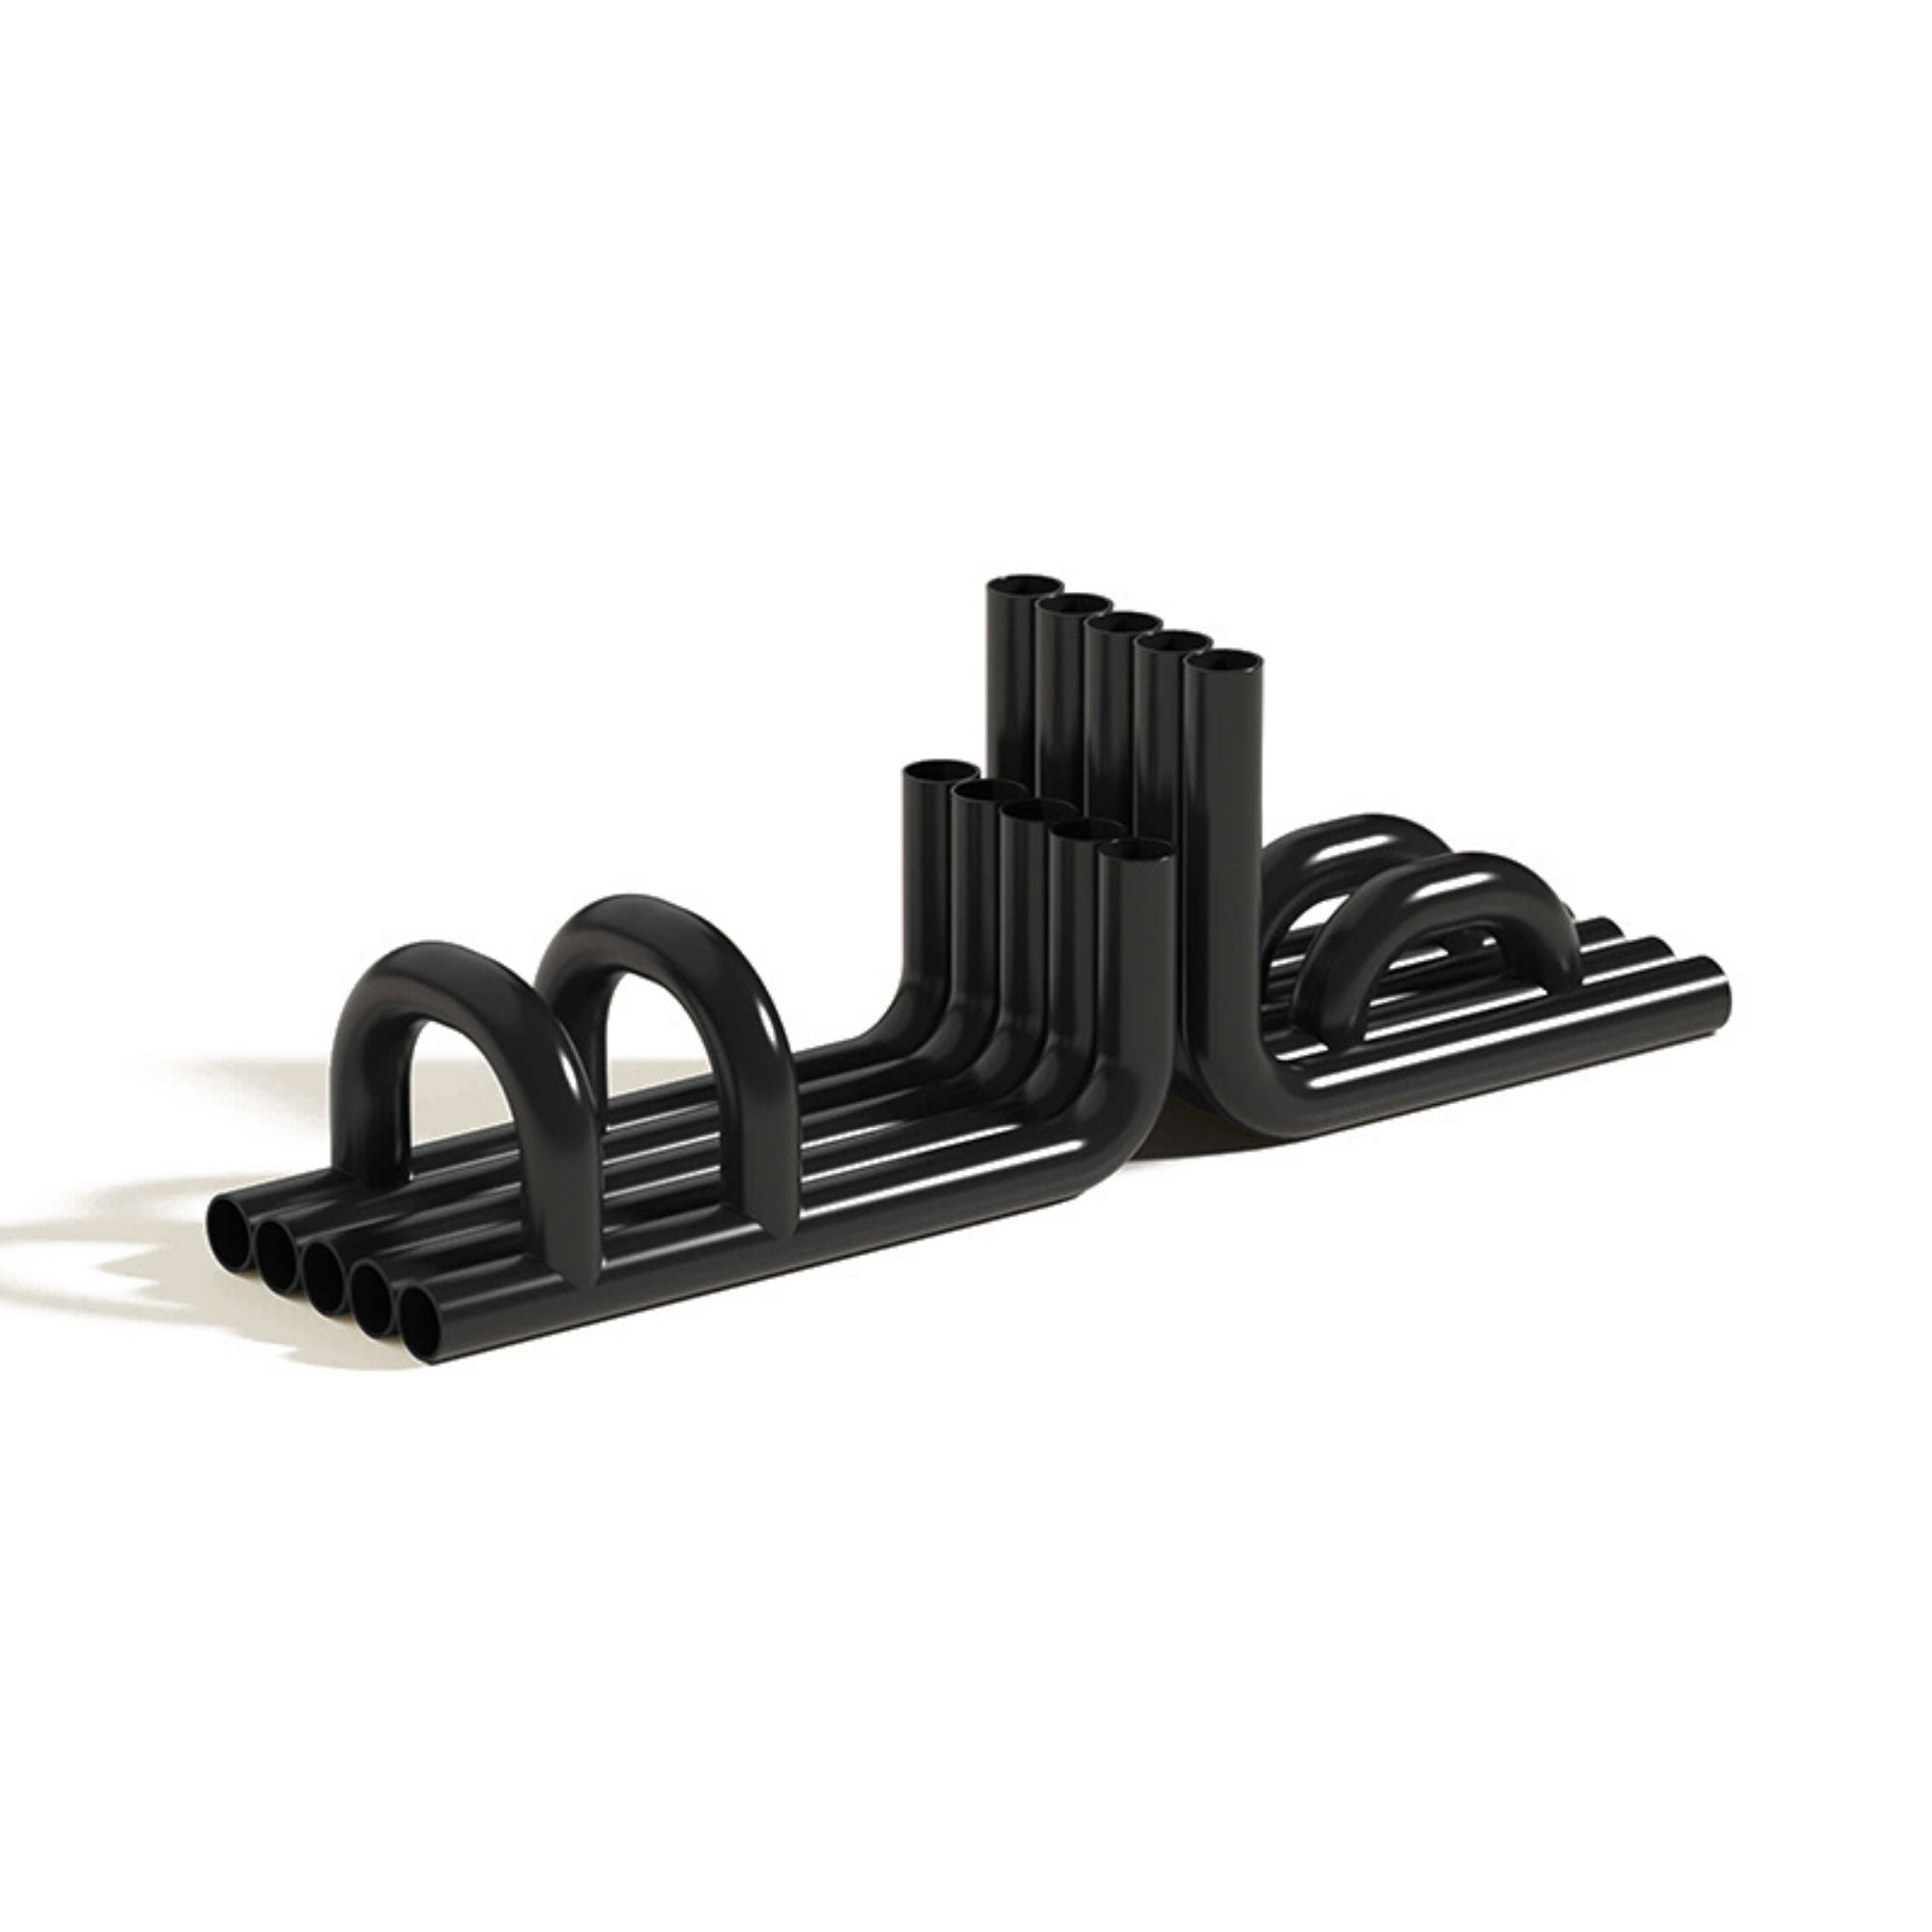 Tube Bookends - THAT COOL LIVING